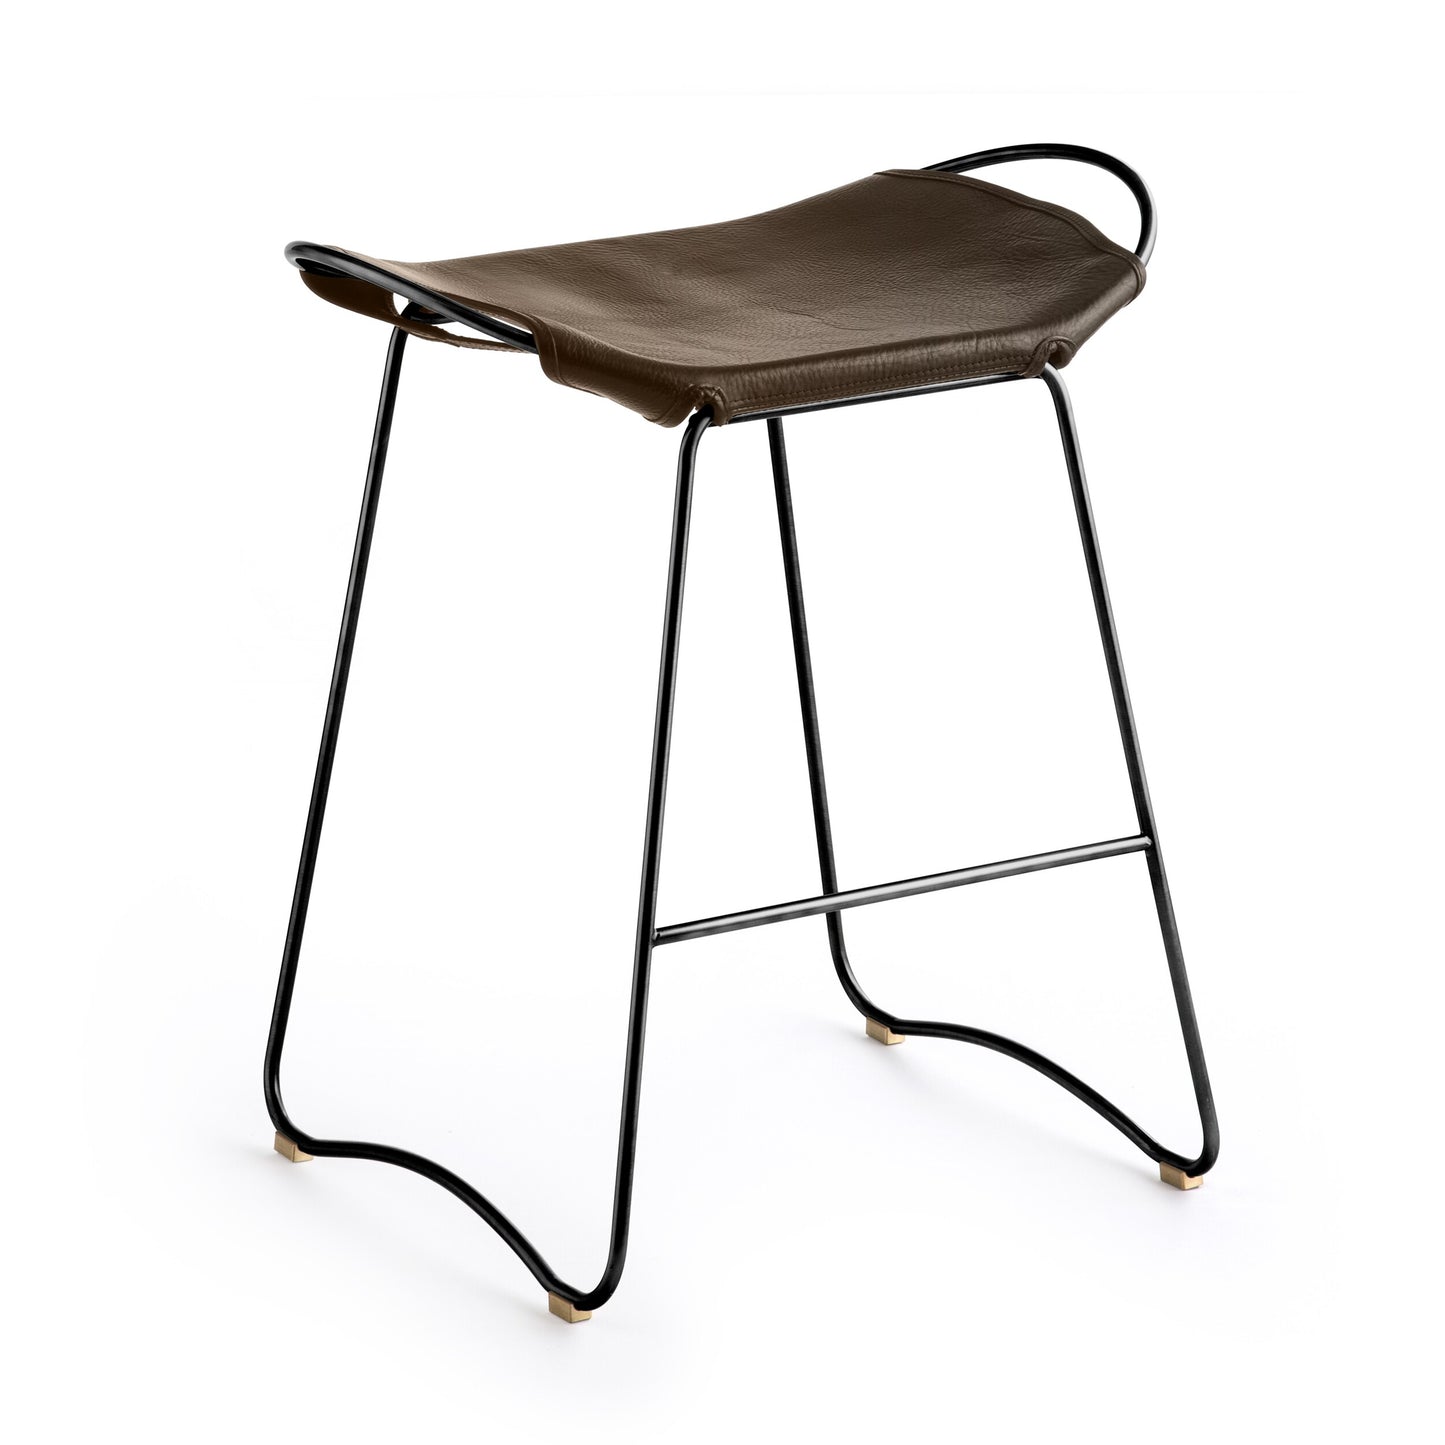 Hug Kitchen Stool - Handcrafted with Cowhide Leather